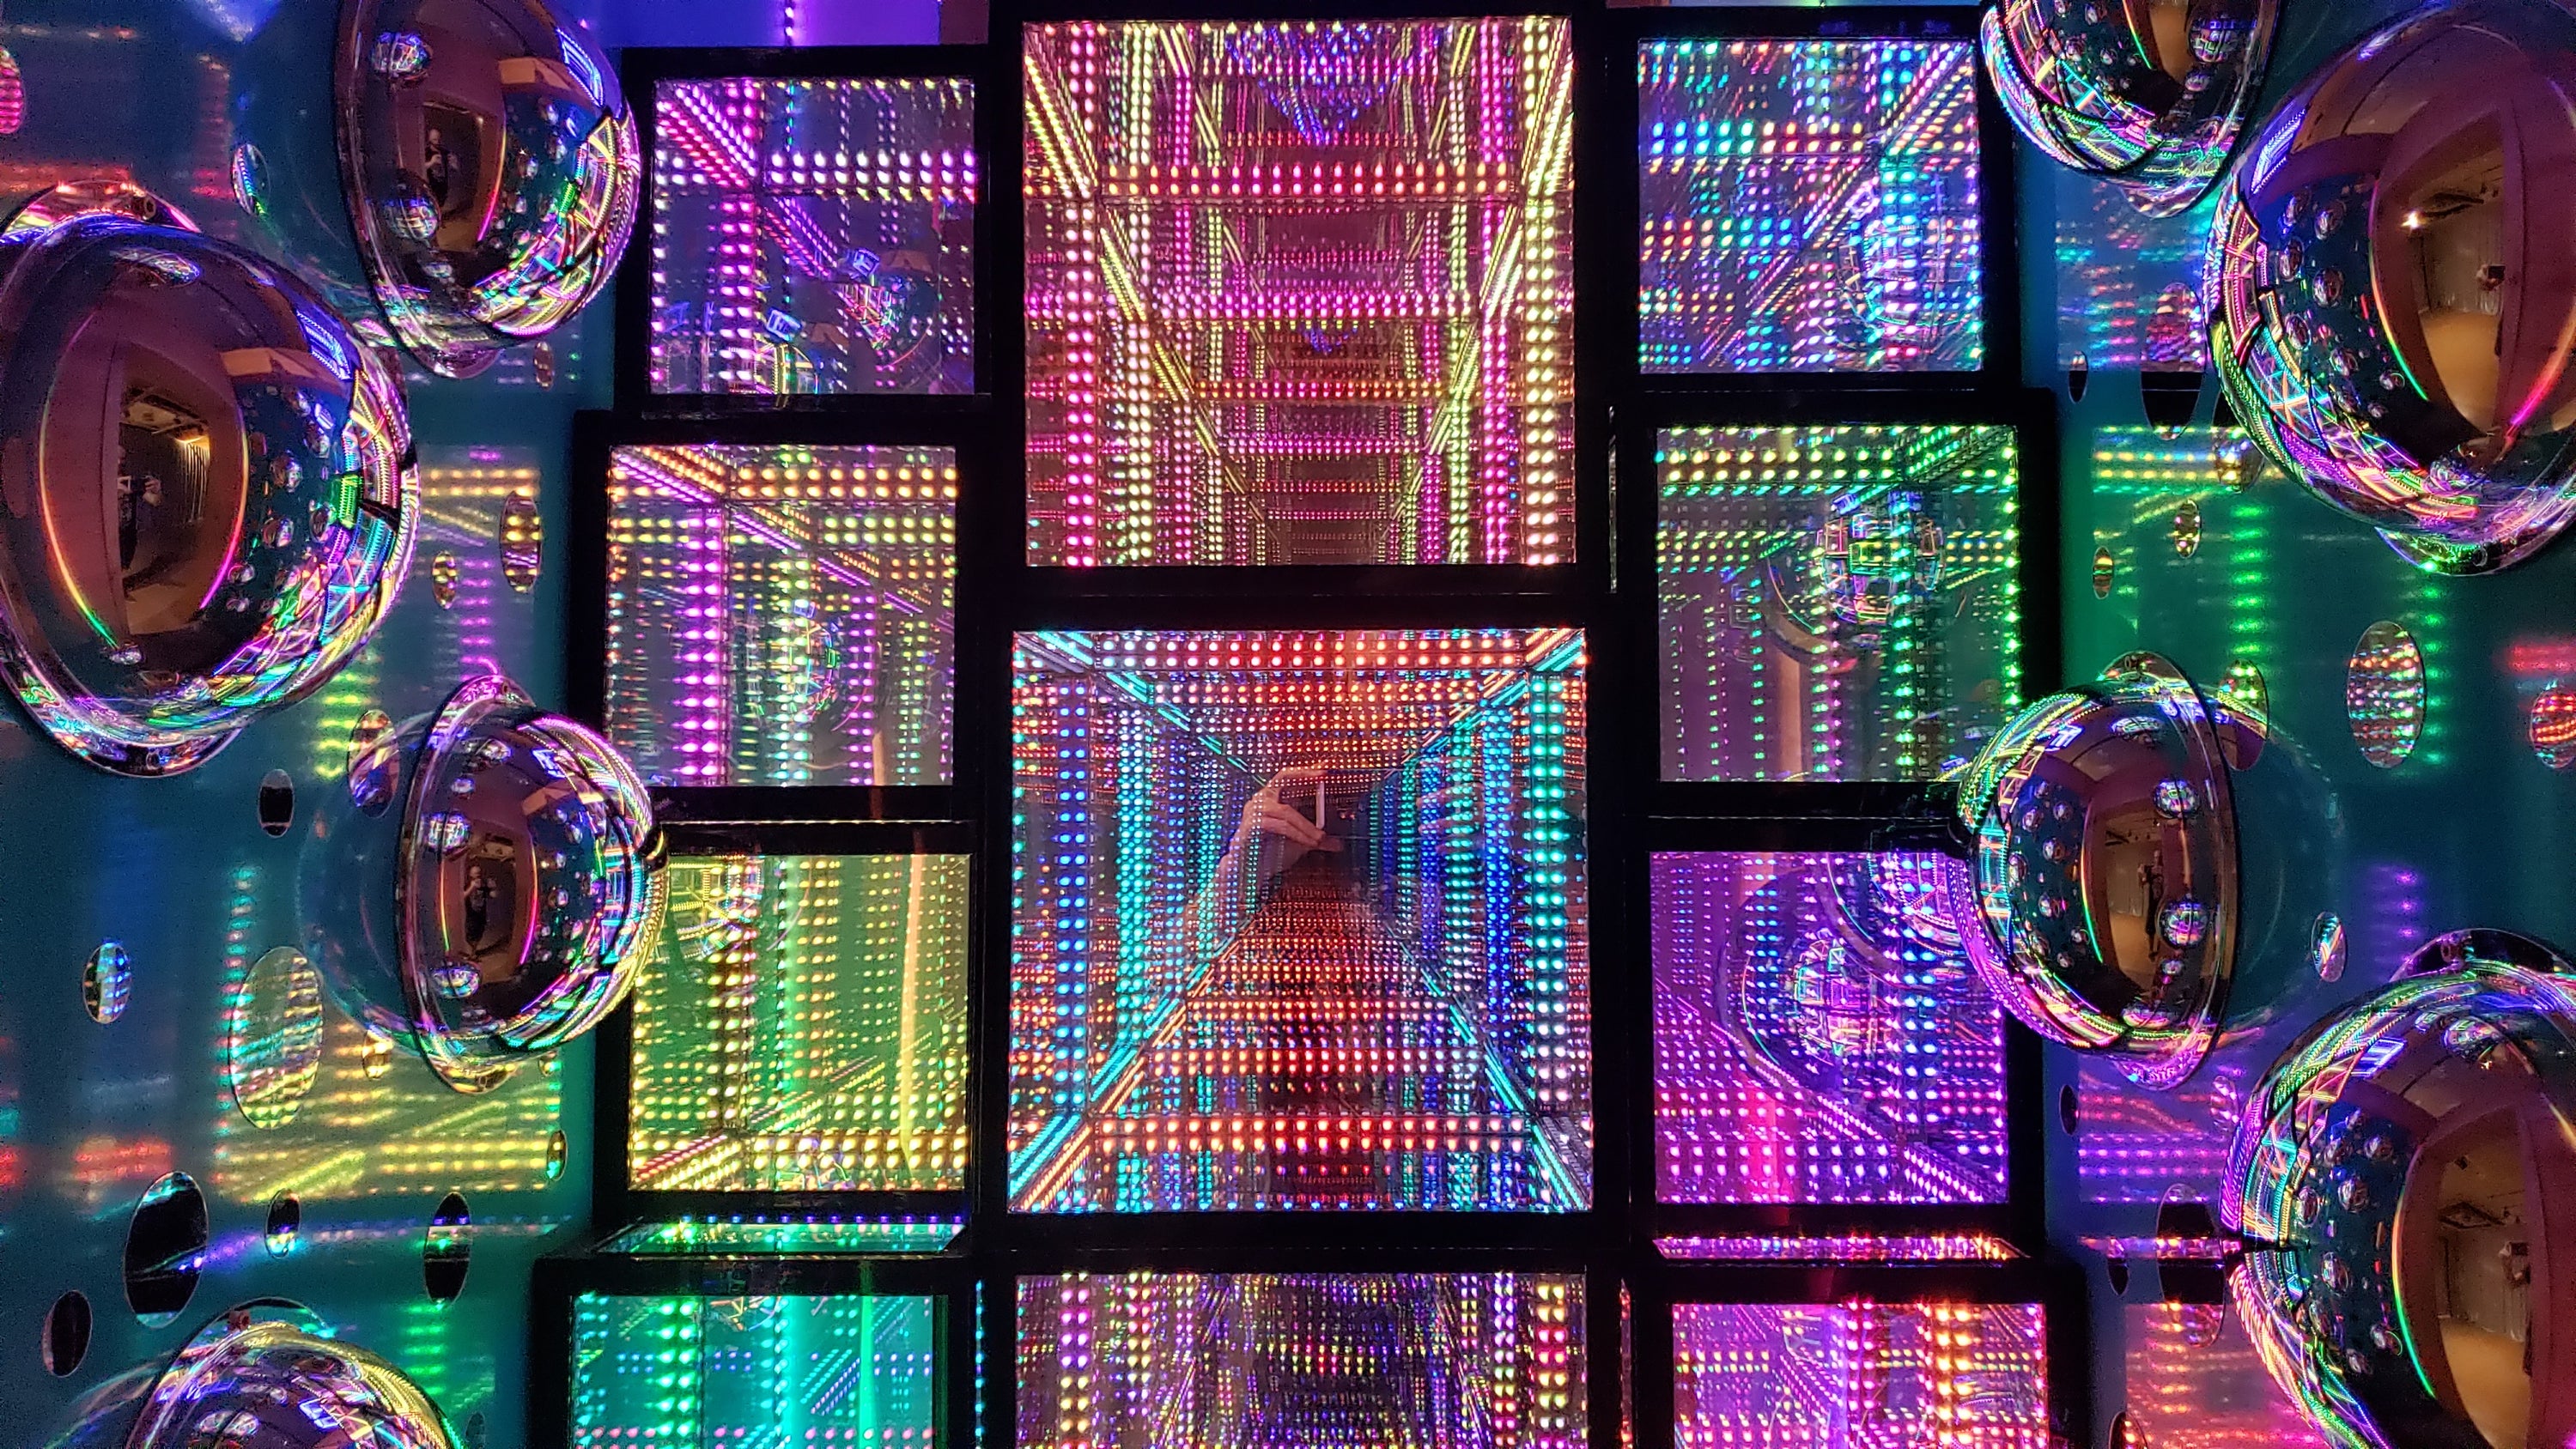 Multiple Hypercubes stacked upon each, creating an LED art installation